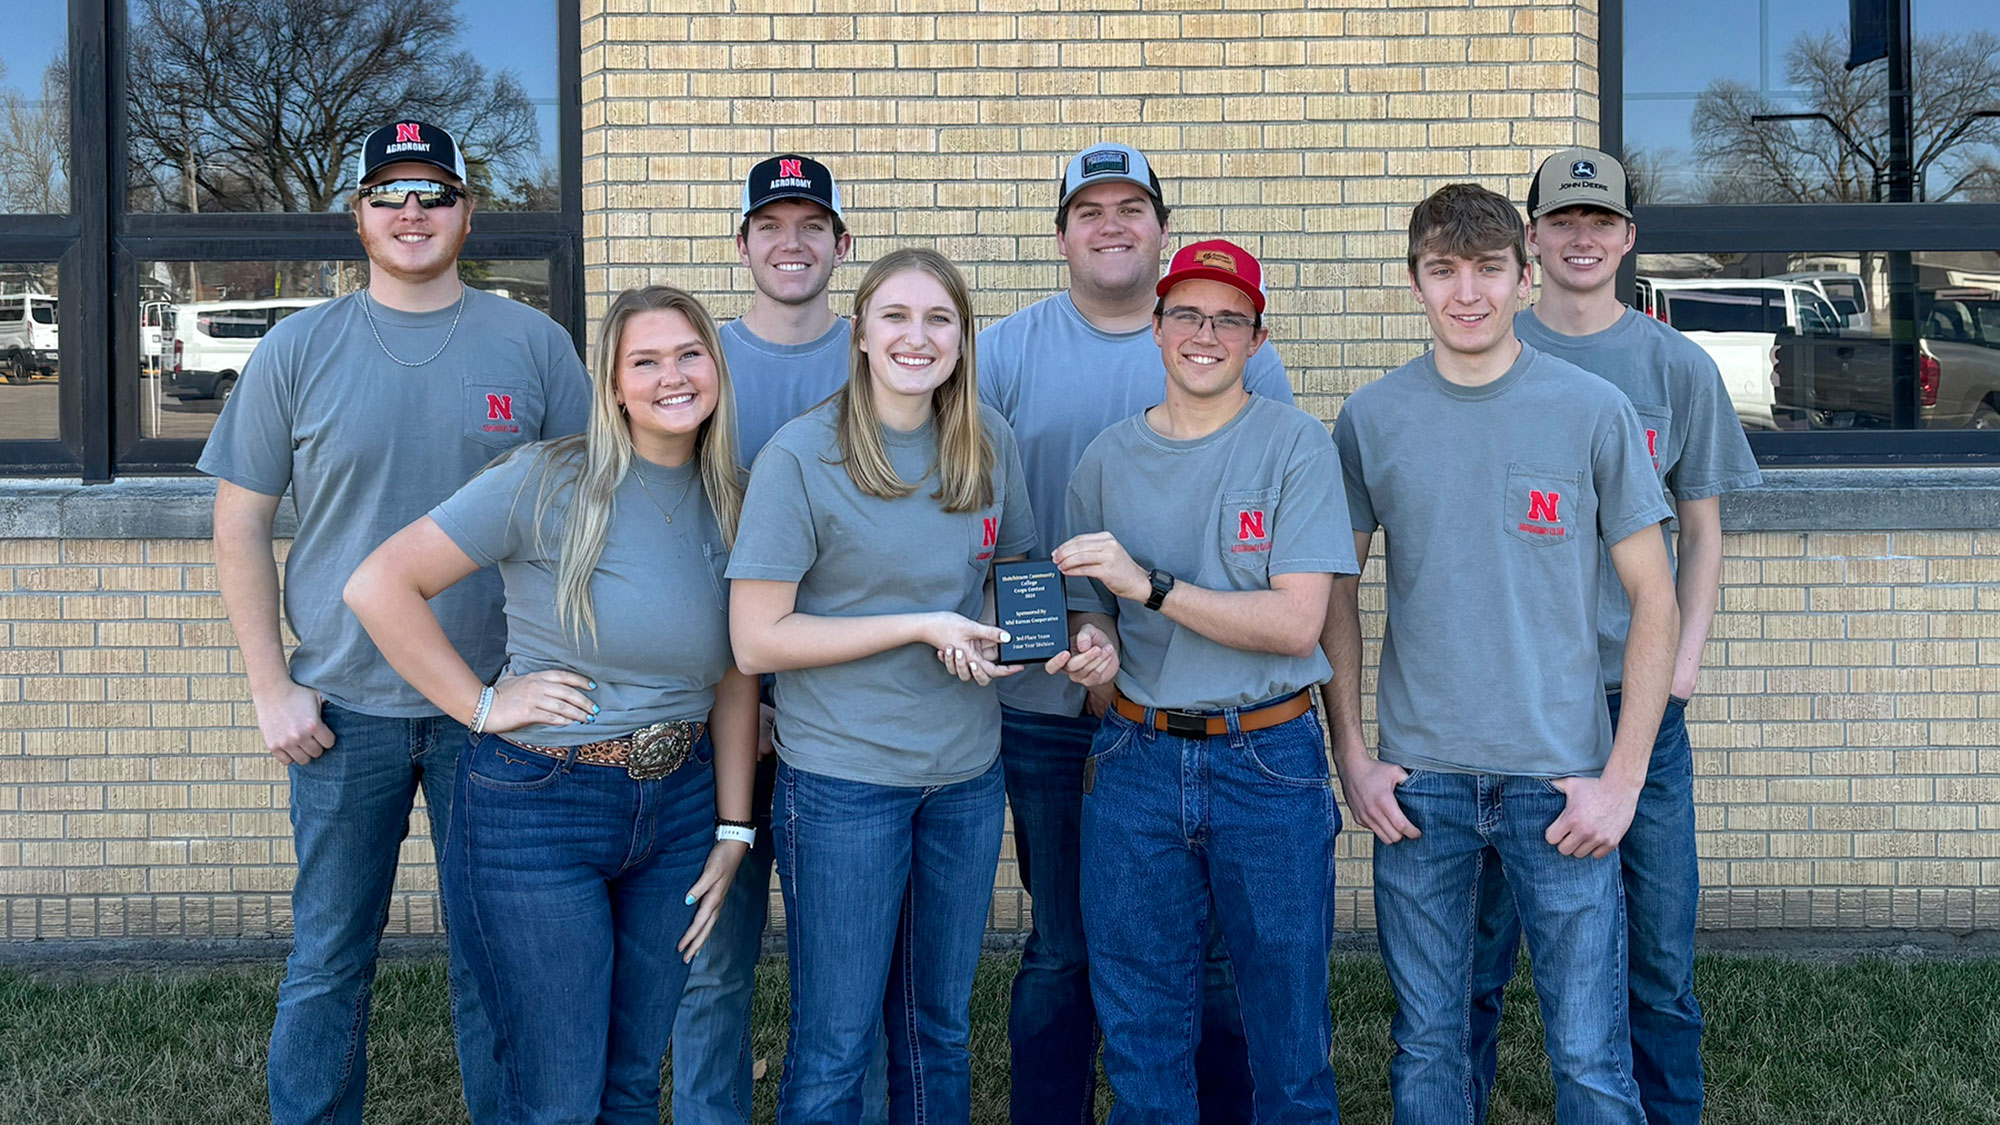 The University of Nebraska-Lincoln Crops Judging Team took third place overall in the Regional Crops Judging Contest at Hutchinson Community College in Hutchinson, Kansas, Feb. 24.